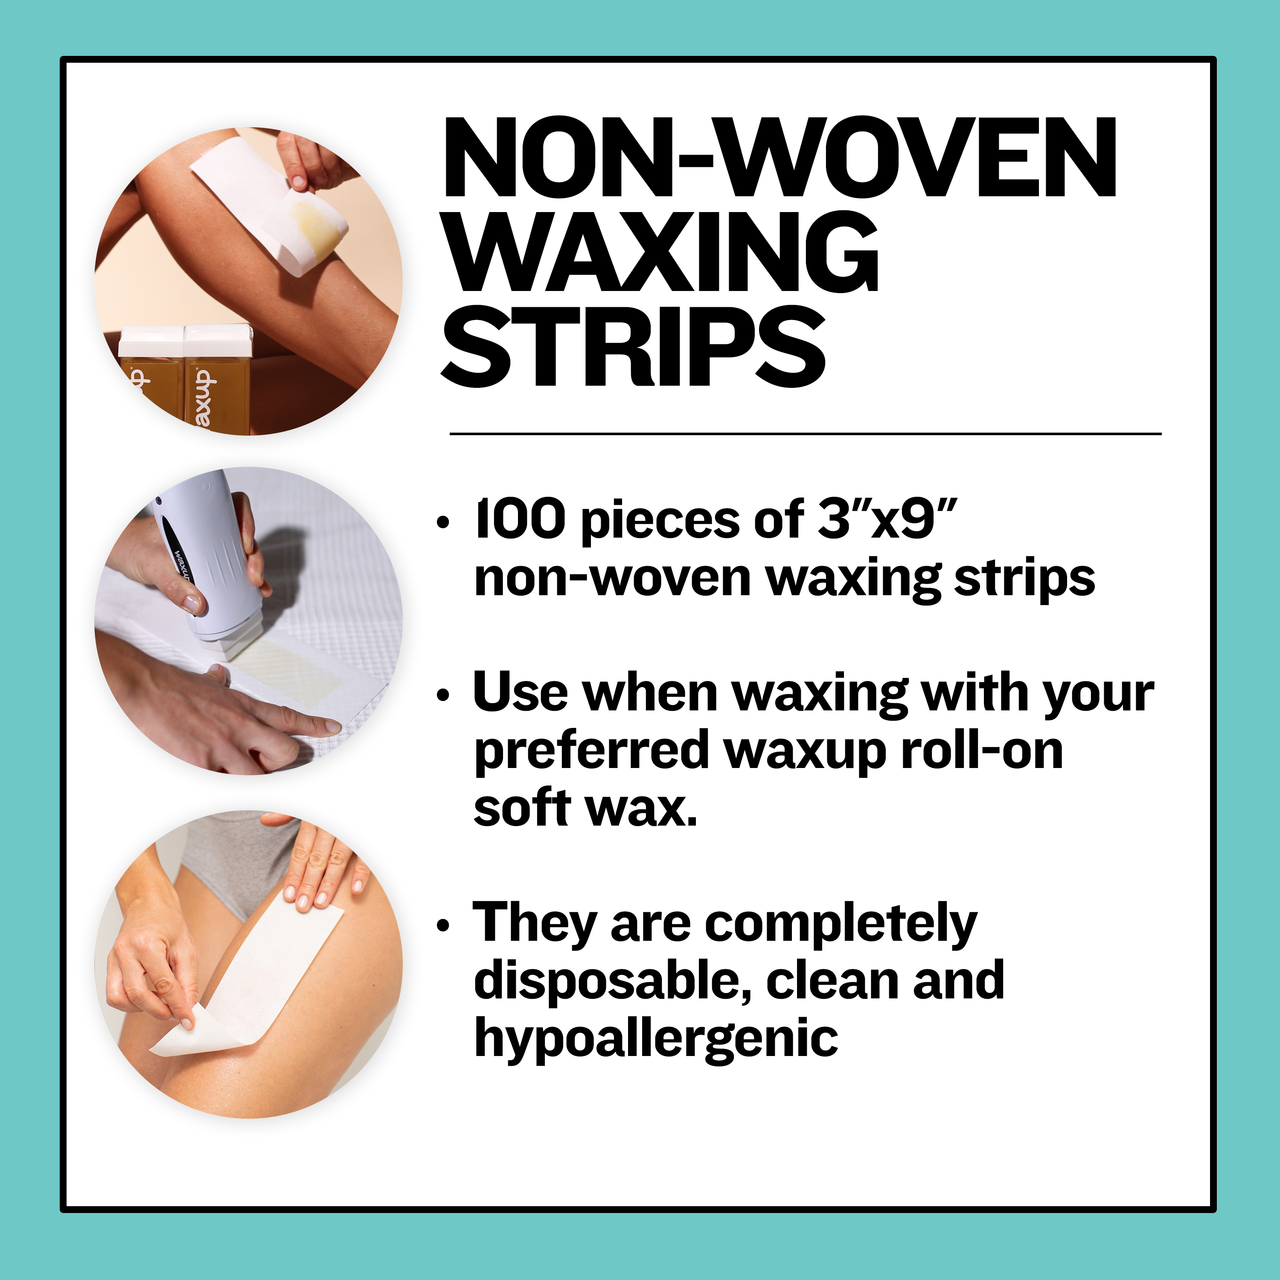 Non Woven Waxing Strips 3"x9" 100 Count - thatswaxup -  - Non Woven Waxing Strips - waxup hair removal wax body waxing kit women and men professional waxing supplies